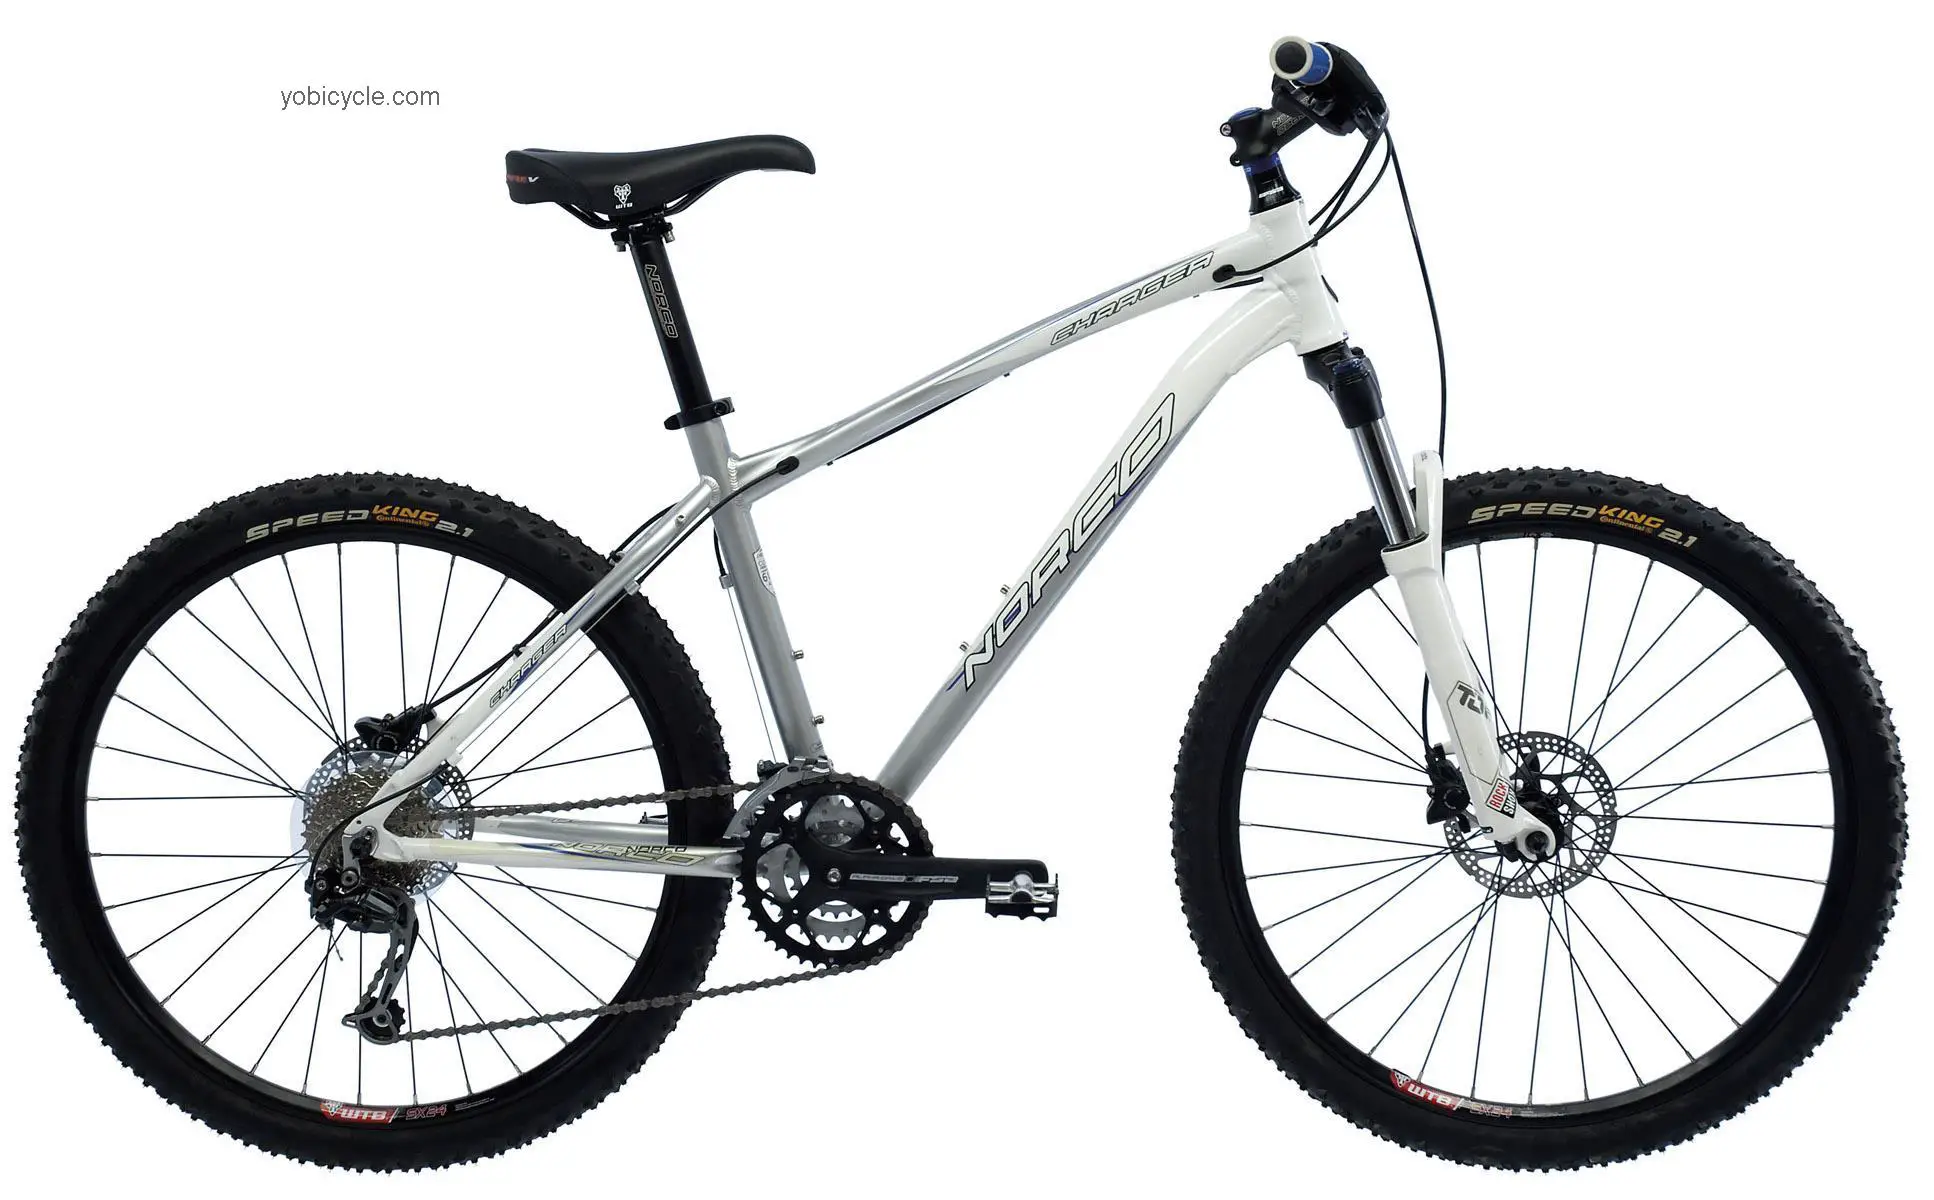 Norco Charger 2011 comparison online with competitors